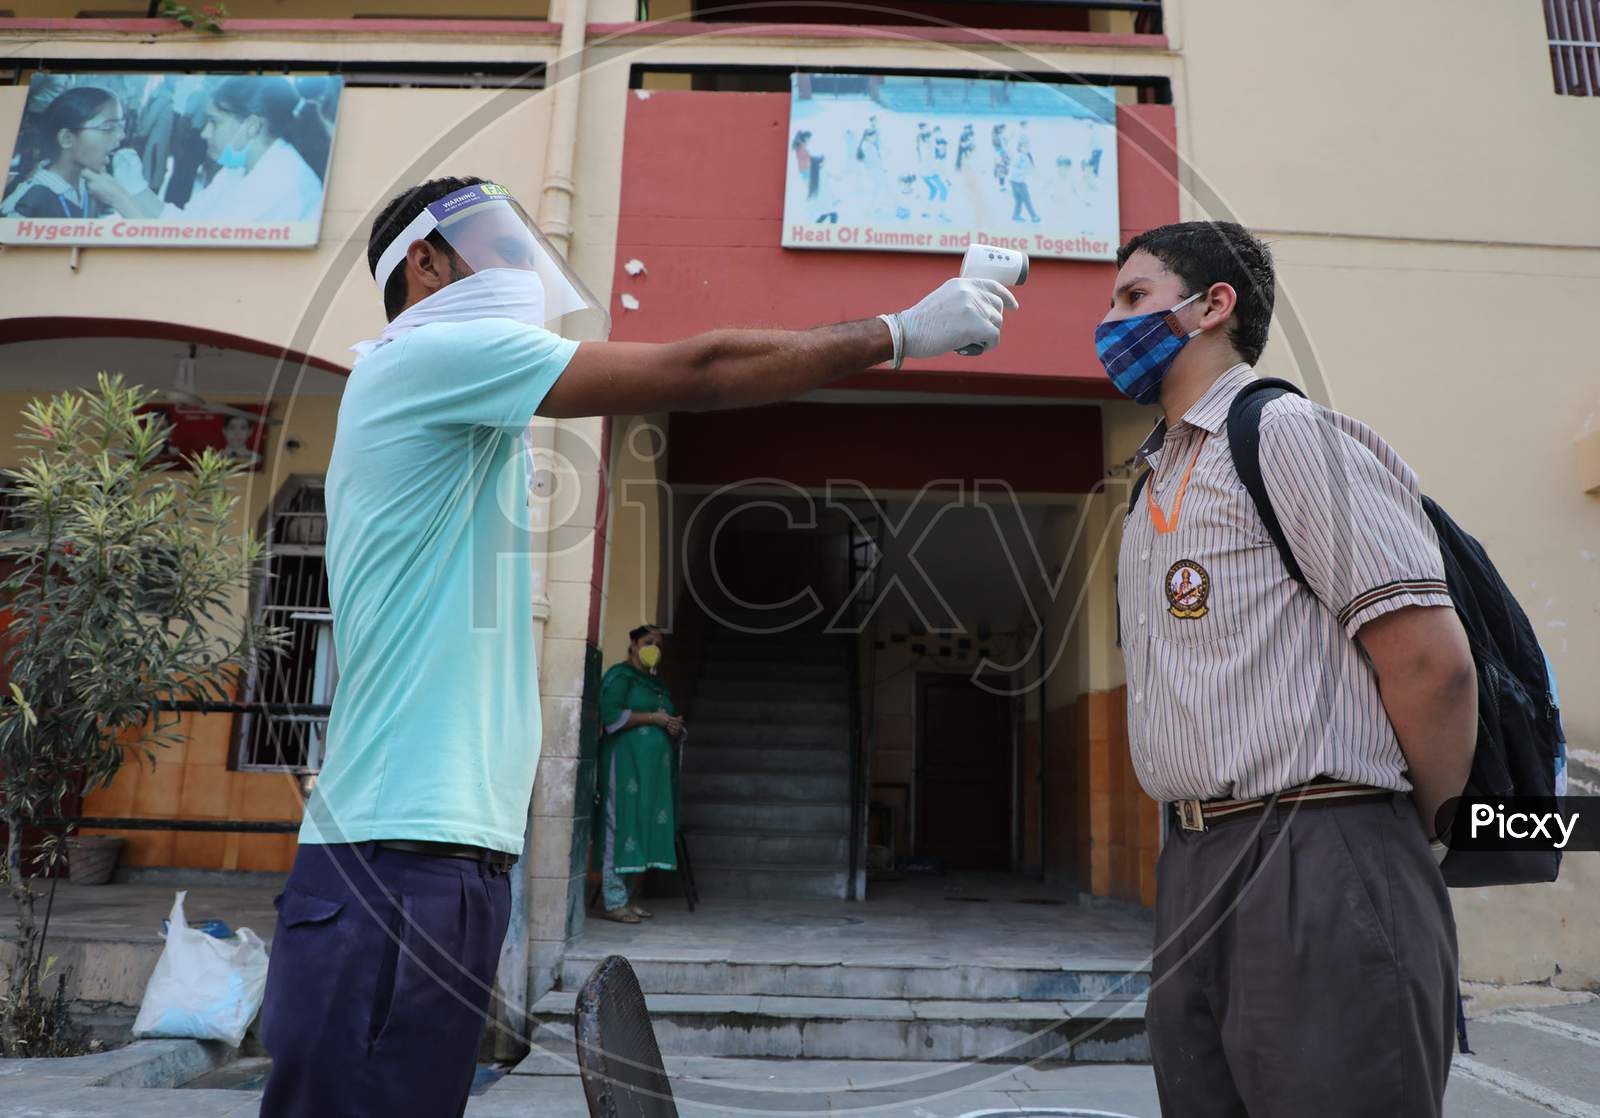 Students getting screened for fever at a school in Jammu on 21 September,2020. The schools across Jammu region partially reopened for 9th to 12th classes after six months closure due to the outbreak of Coronavirus pandemi .